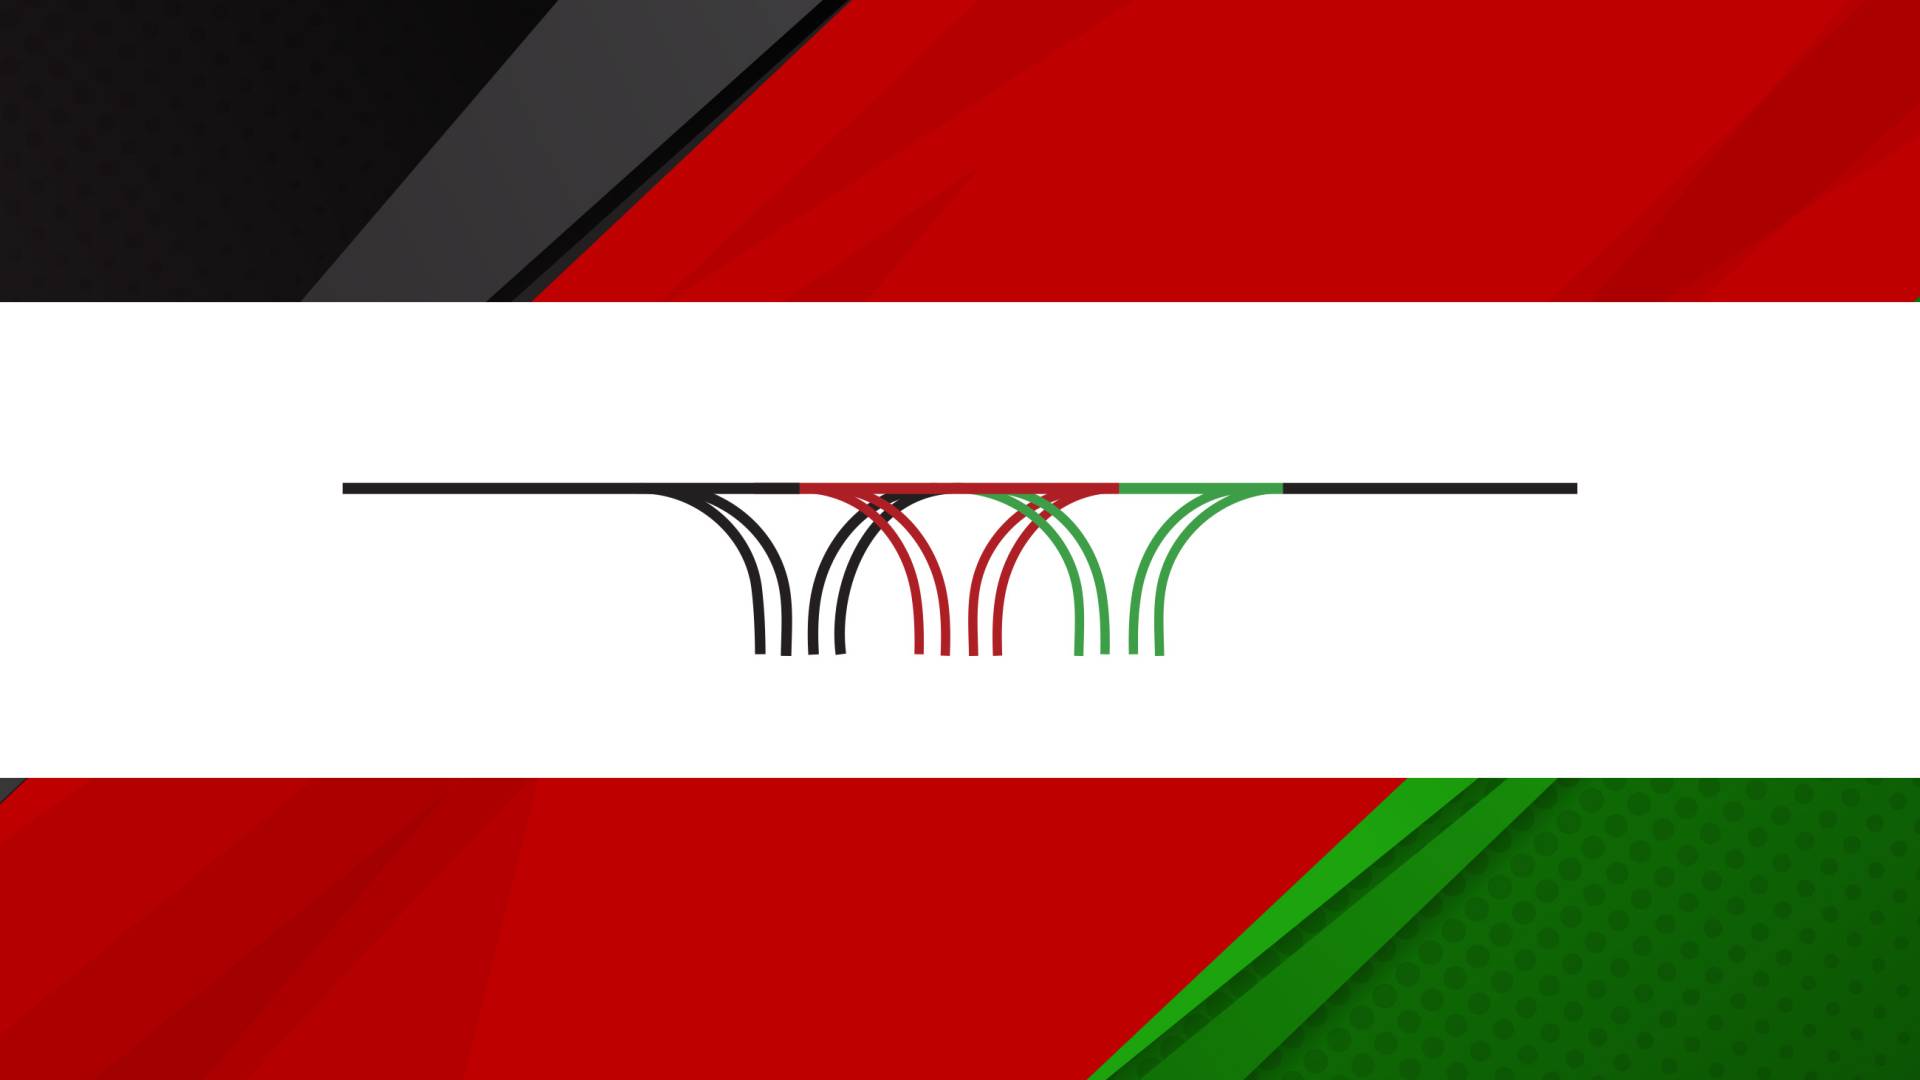 SPIA symbol atop colors of Afghan flag